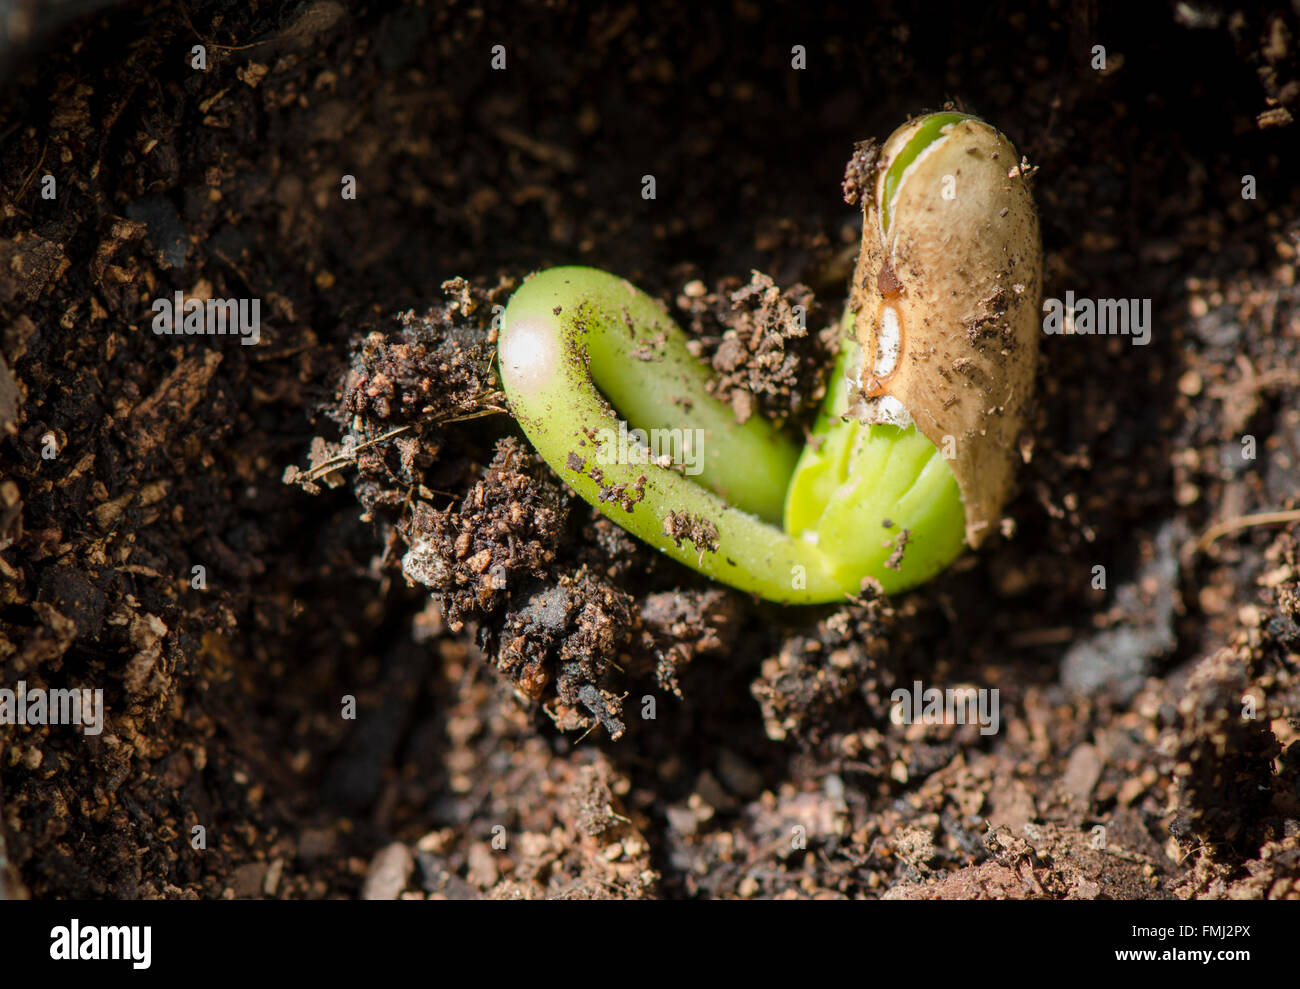 Spring, common bean sprout, sprouting, Phaseolus vulgaris planted in container soil. Stock Photo